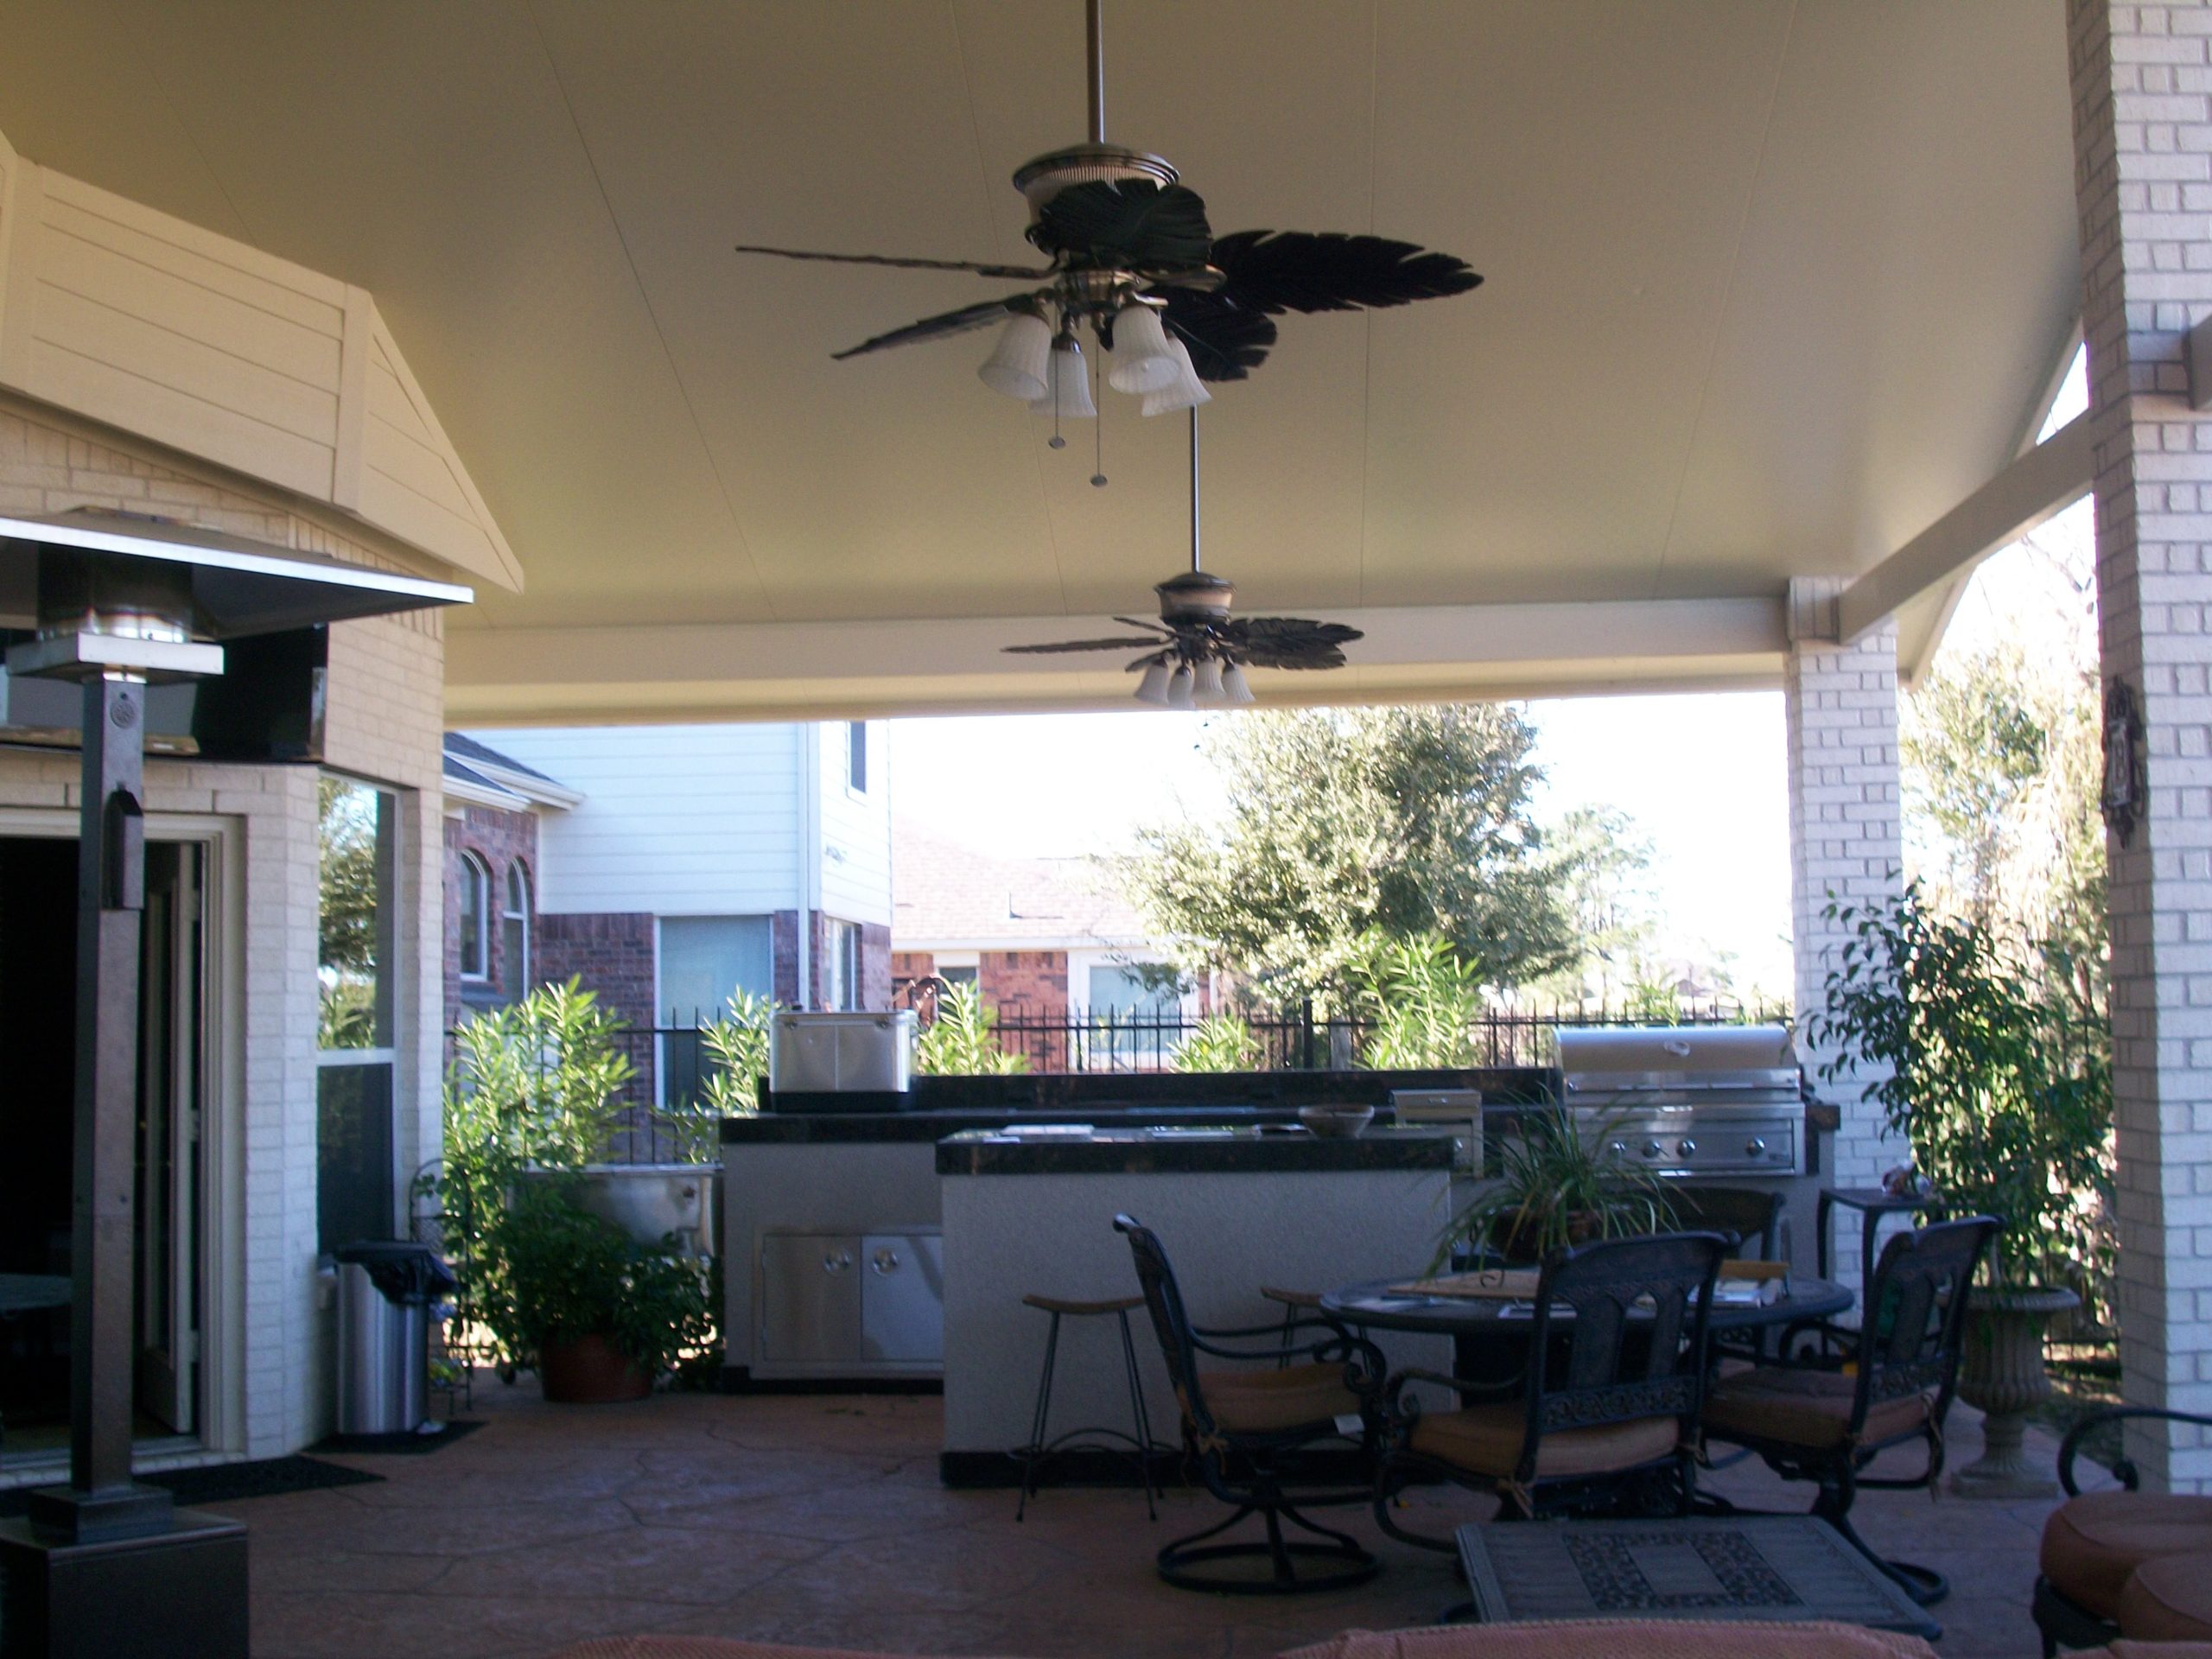 What are the benefits of an Insulated Patio Cover​